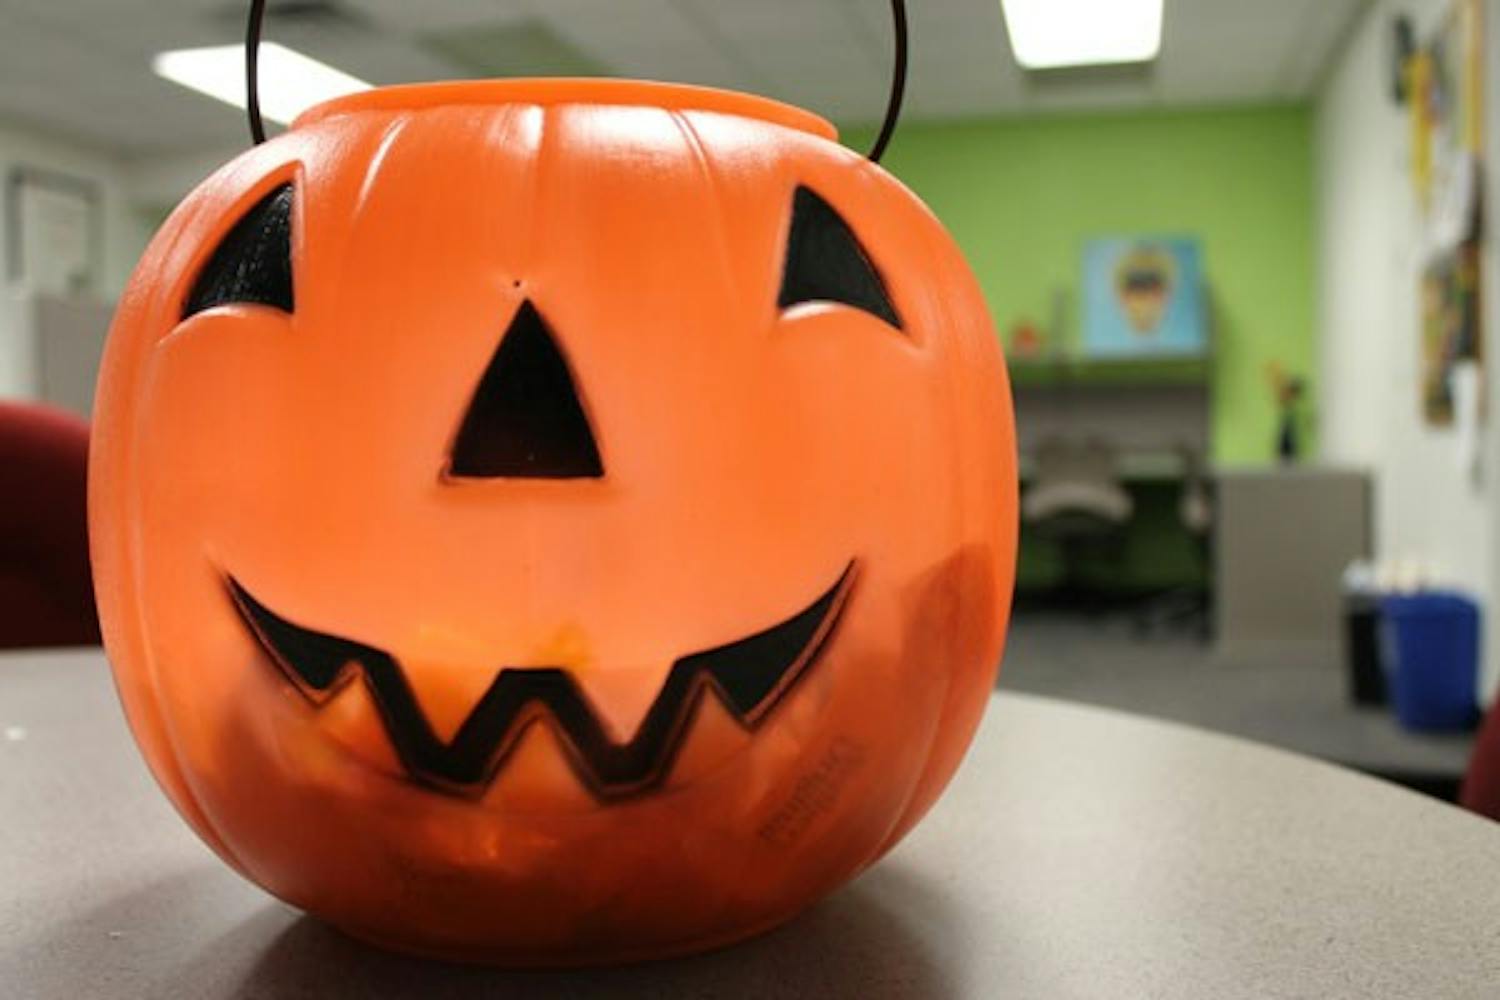 A Halloween pumpkin filled with candy in the Interdisciplinary B Building satisfies students' sweet tooth Tuesday afternoon. (Photo by Robin Kiyutelluk)